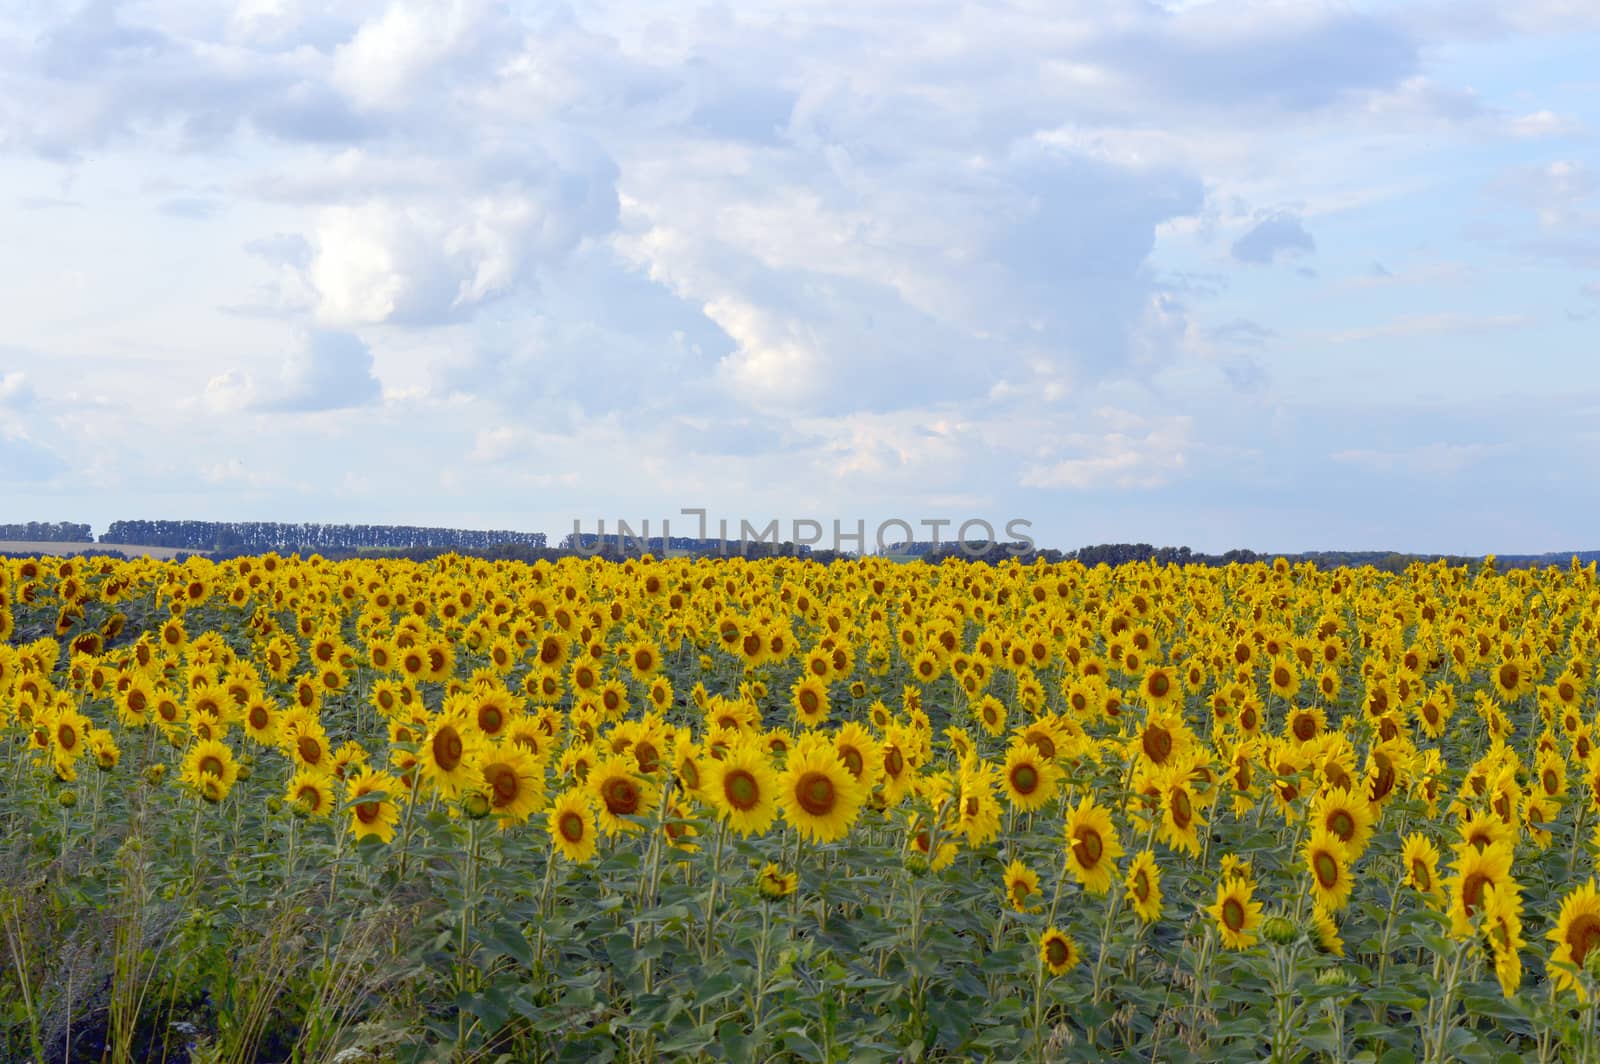 sunflowers field under blue sky with clouds